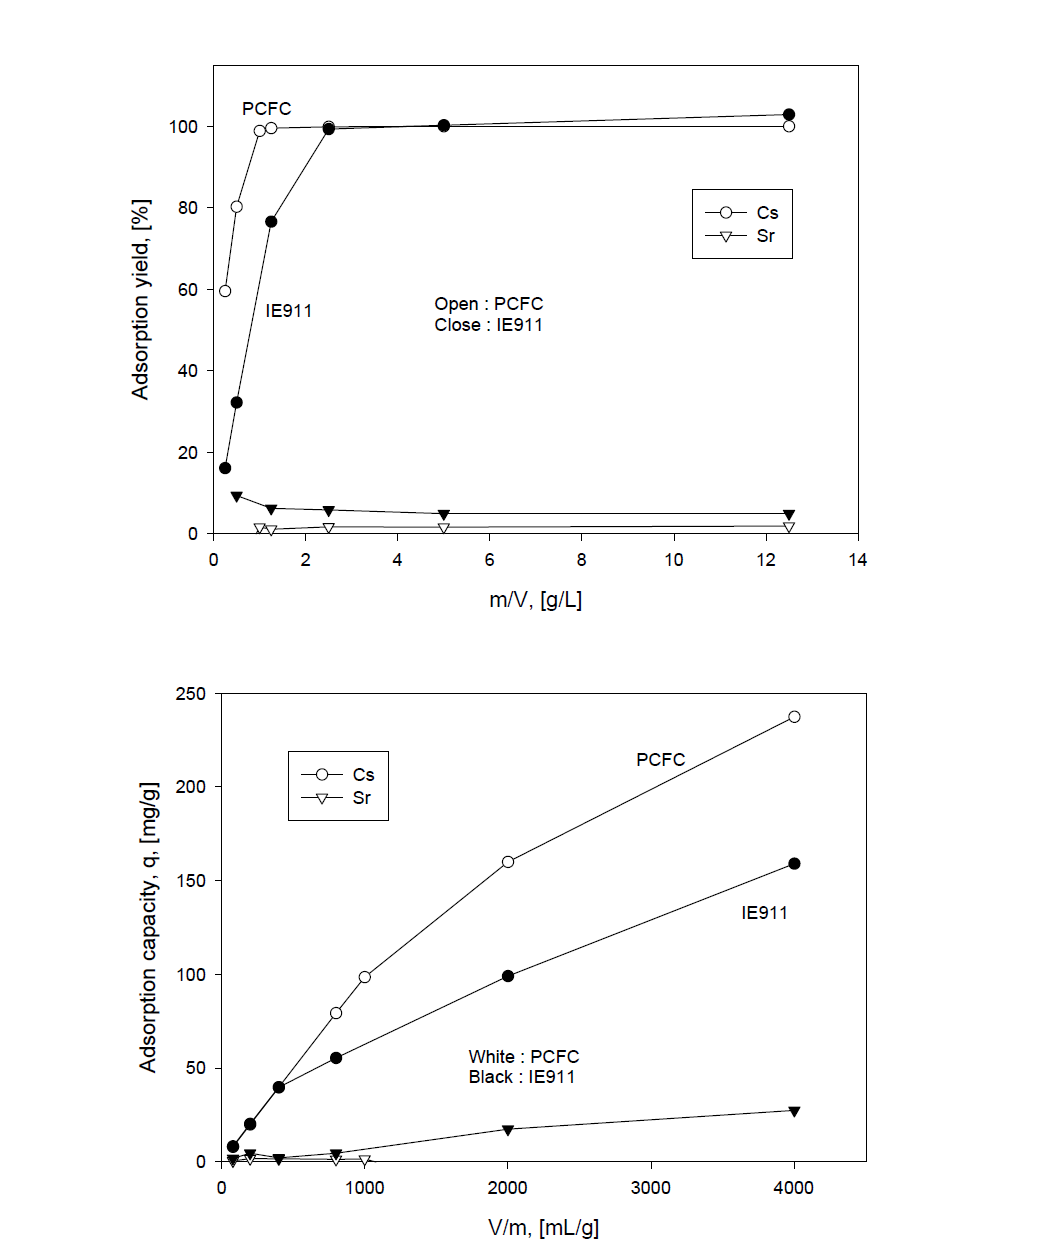 Adsorption yield of Cs and Sr by IE911 and PCFC with ratio of m/V(a), and adsorption capacity of Cs and Sr by IE911 and PCFC with ratio of V/m(b).